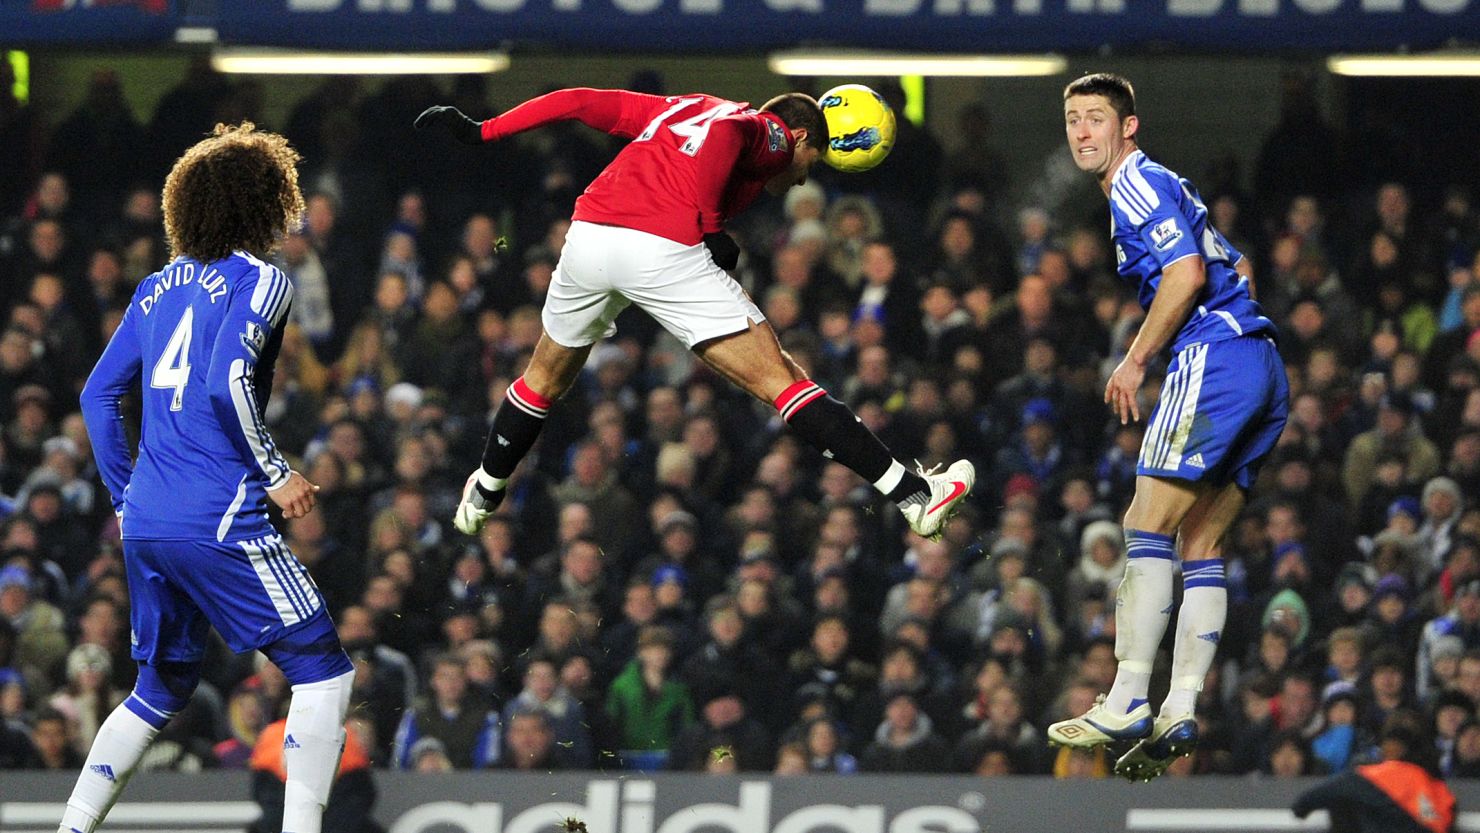 Javier Hernandez heads home a late equalizer to complete Manchester United's comeback at Chelsea.